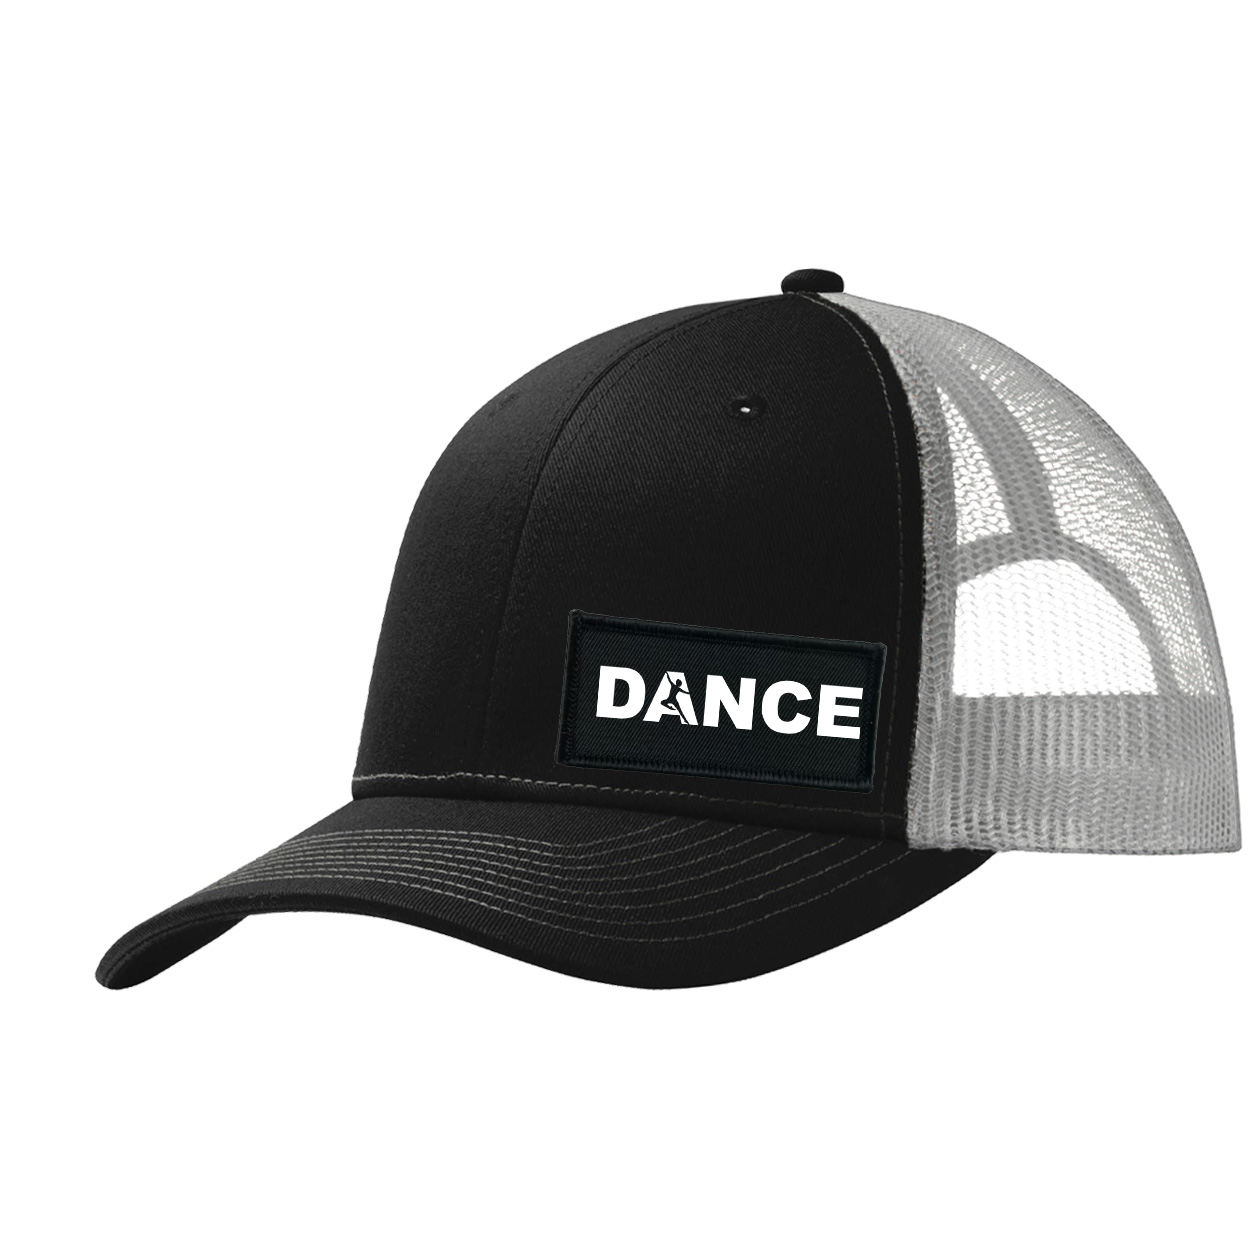 Dance Silhouette Logo Night Out Woven Patch Snapback Trucker Hat Black/Gray